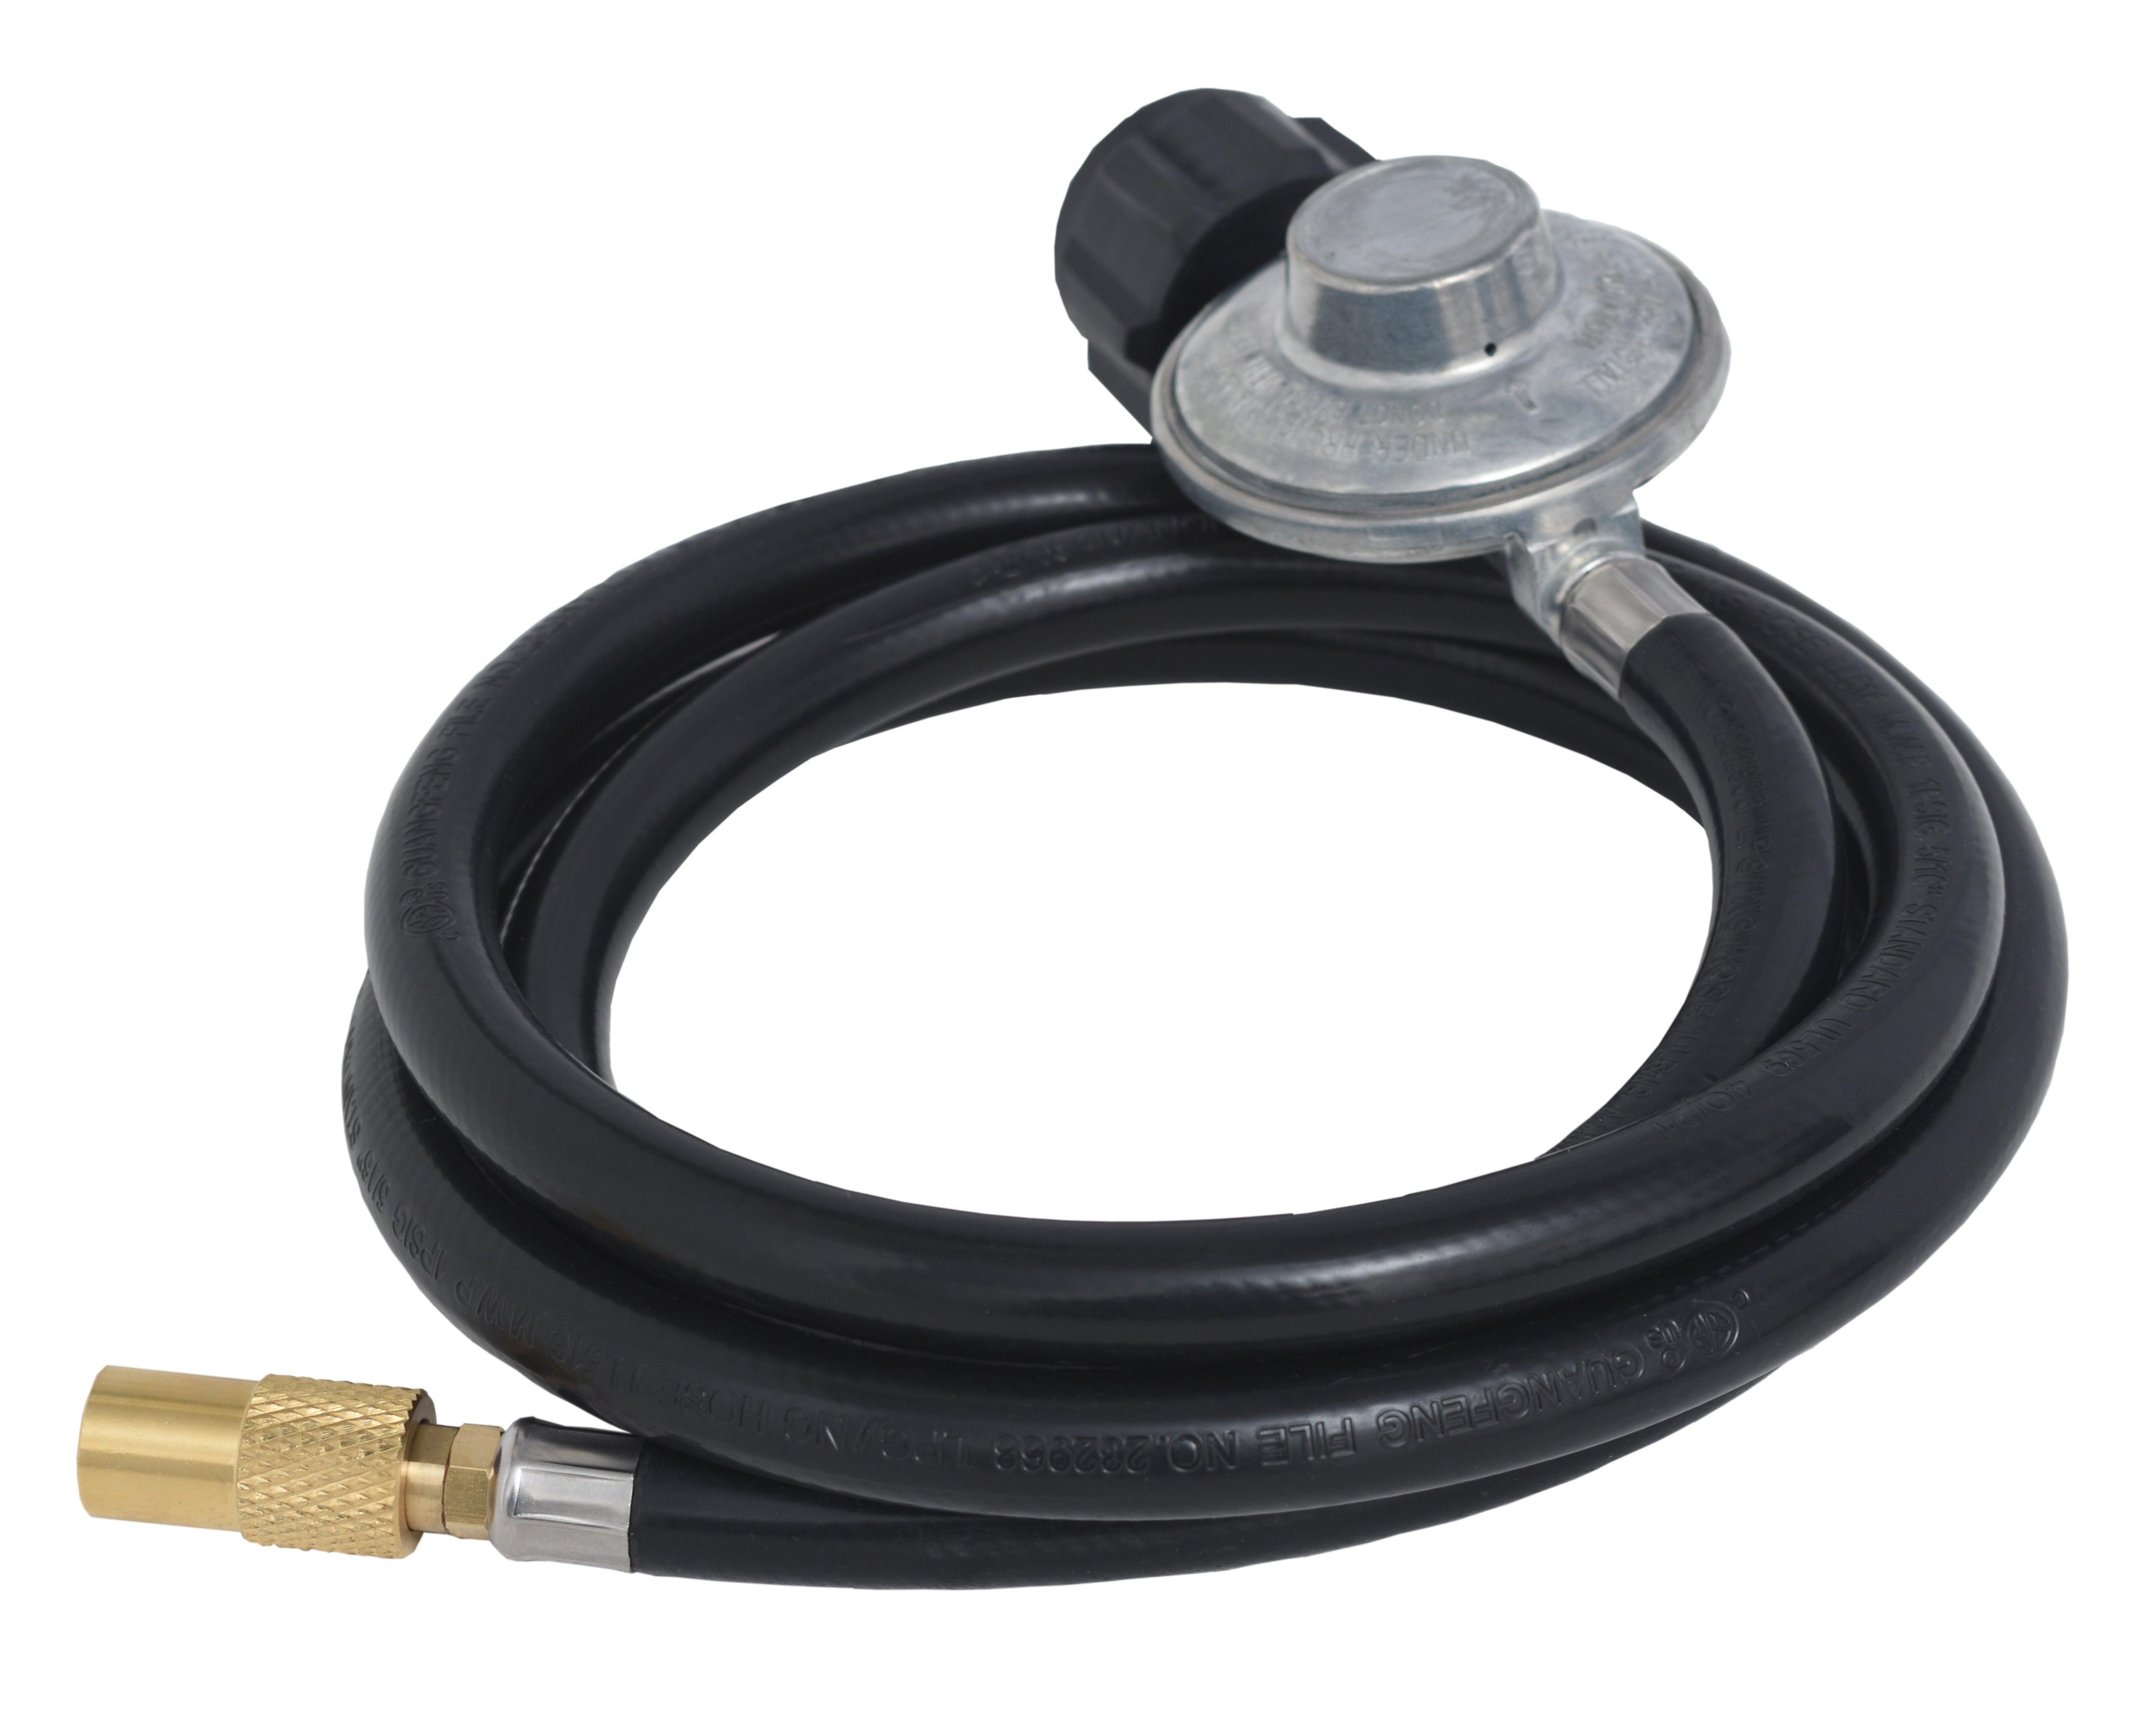 Flame King Regulator Hose Adapter Connect to 20Lb Tank for 17″/22″ Tabletop Grill Griddle, 6 Feet - Flame King